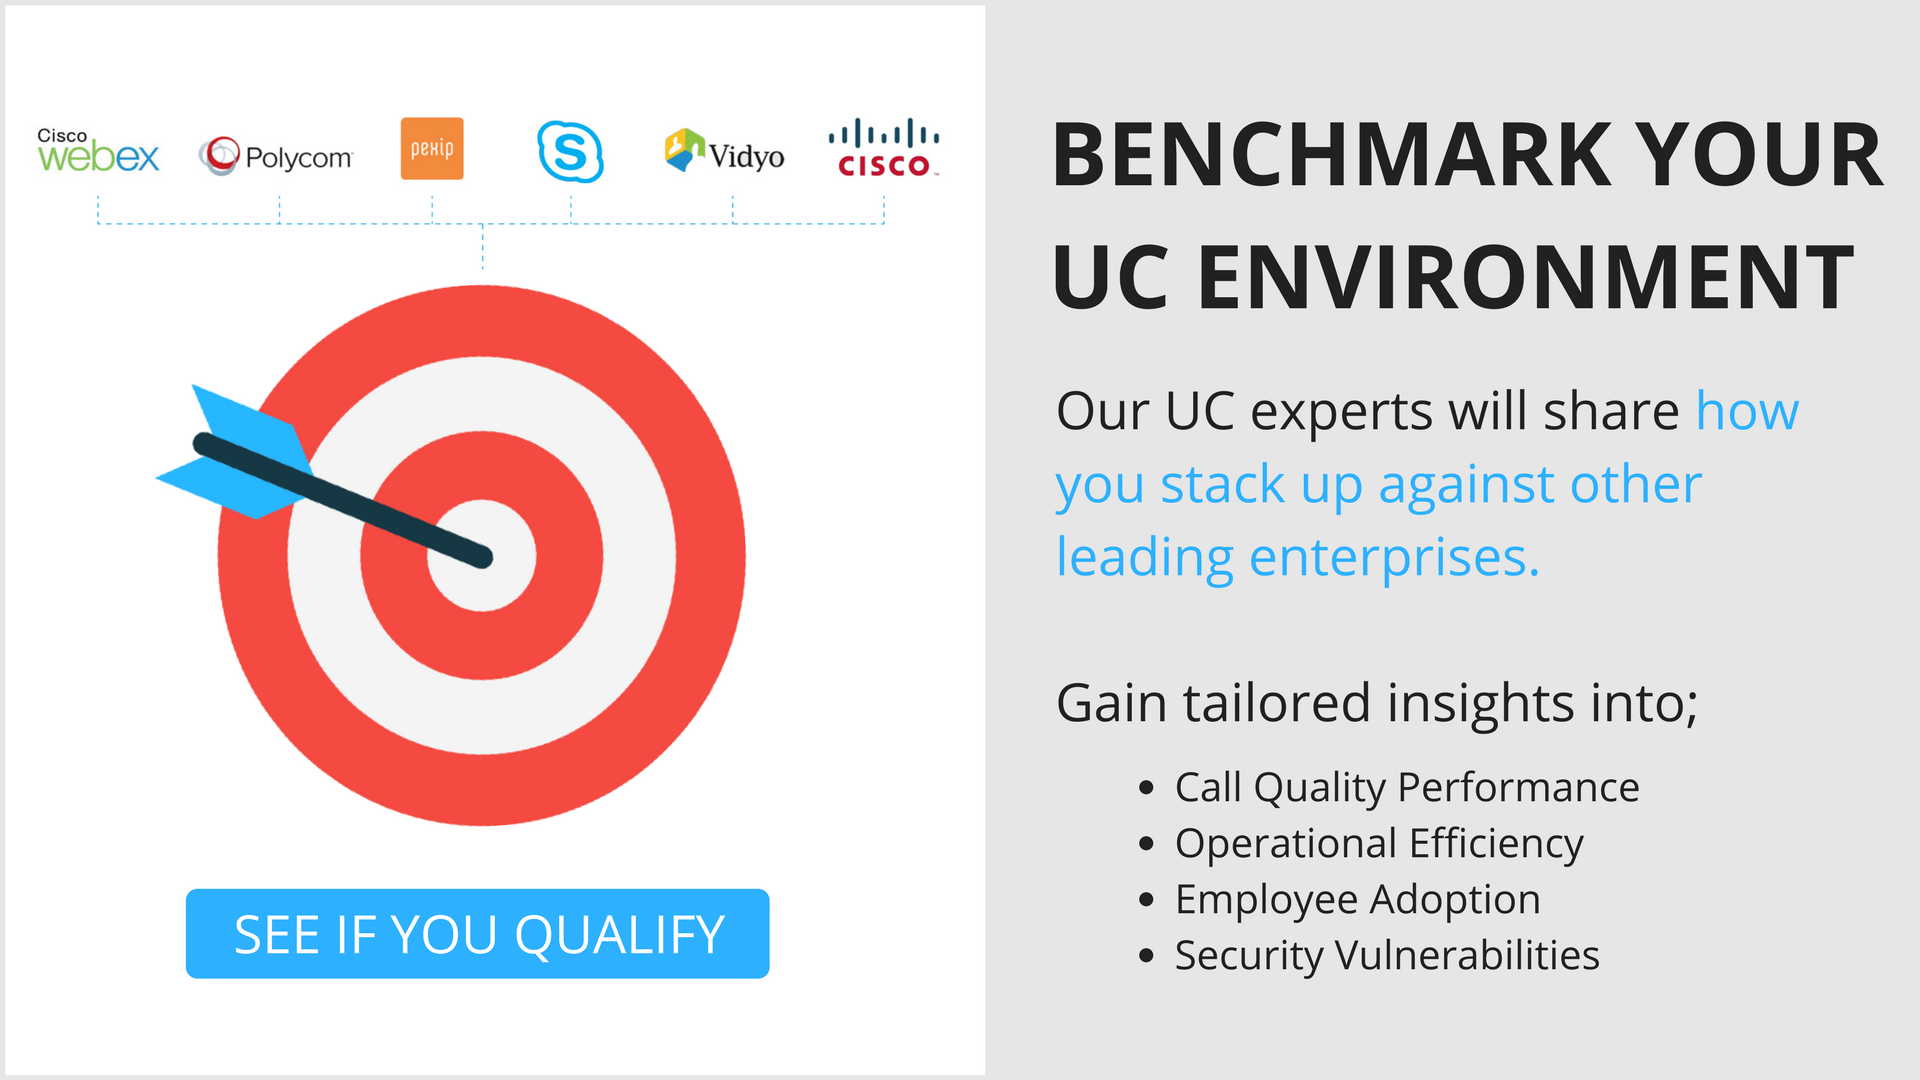 Benchmark your UC Environent